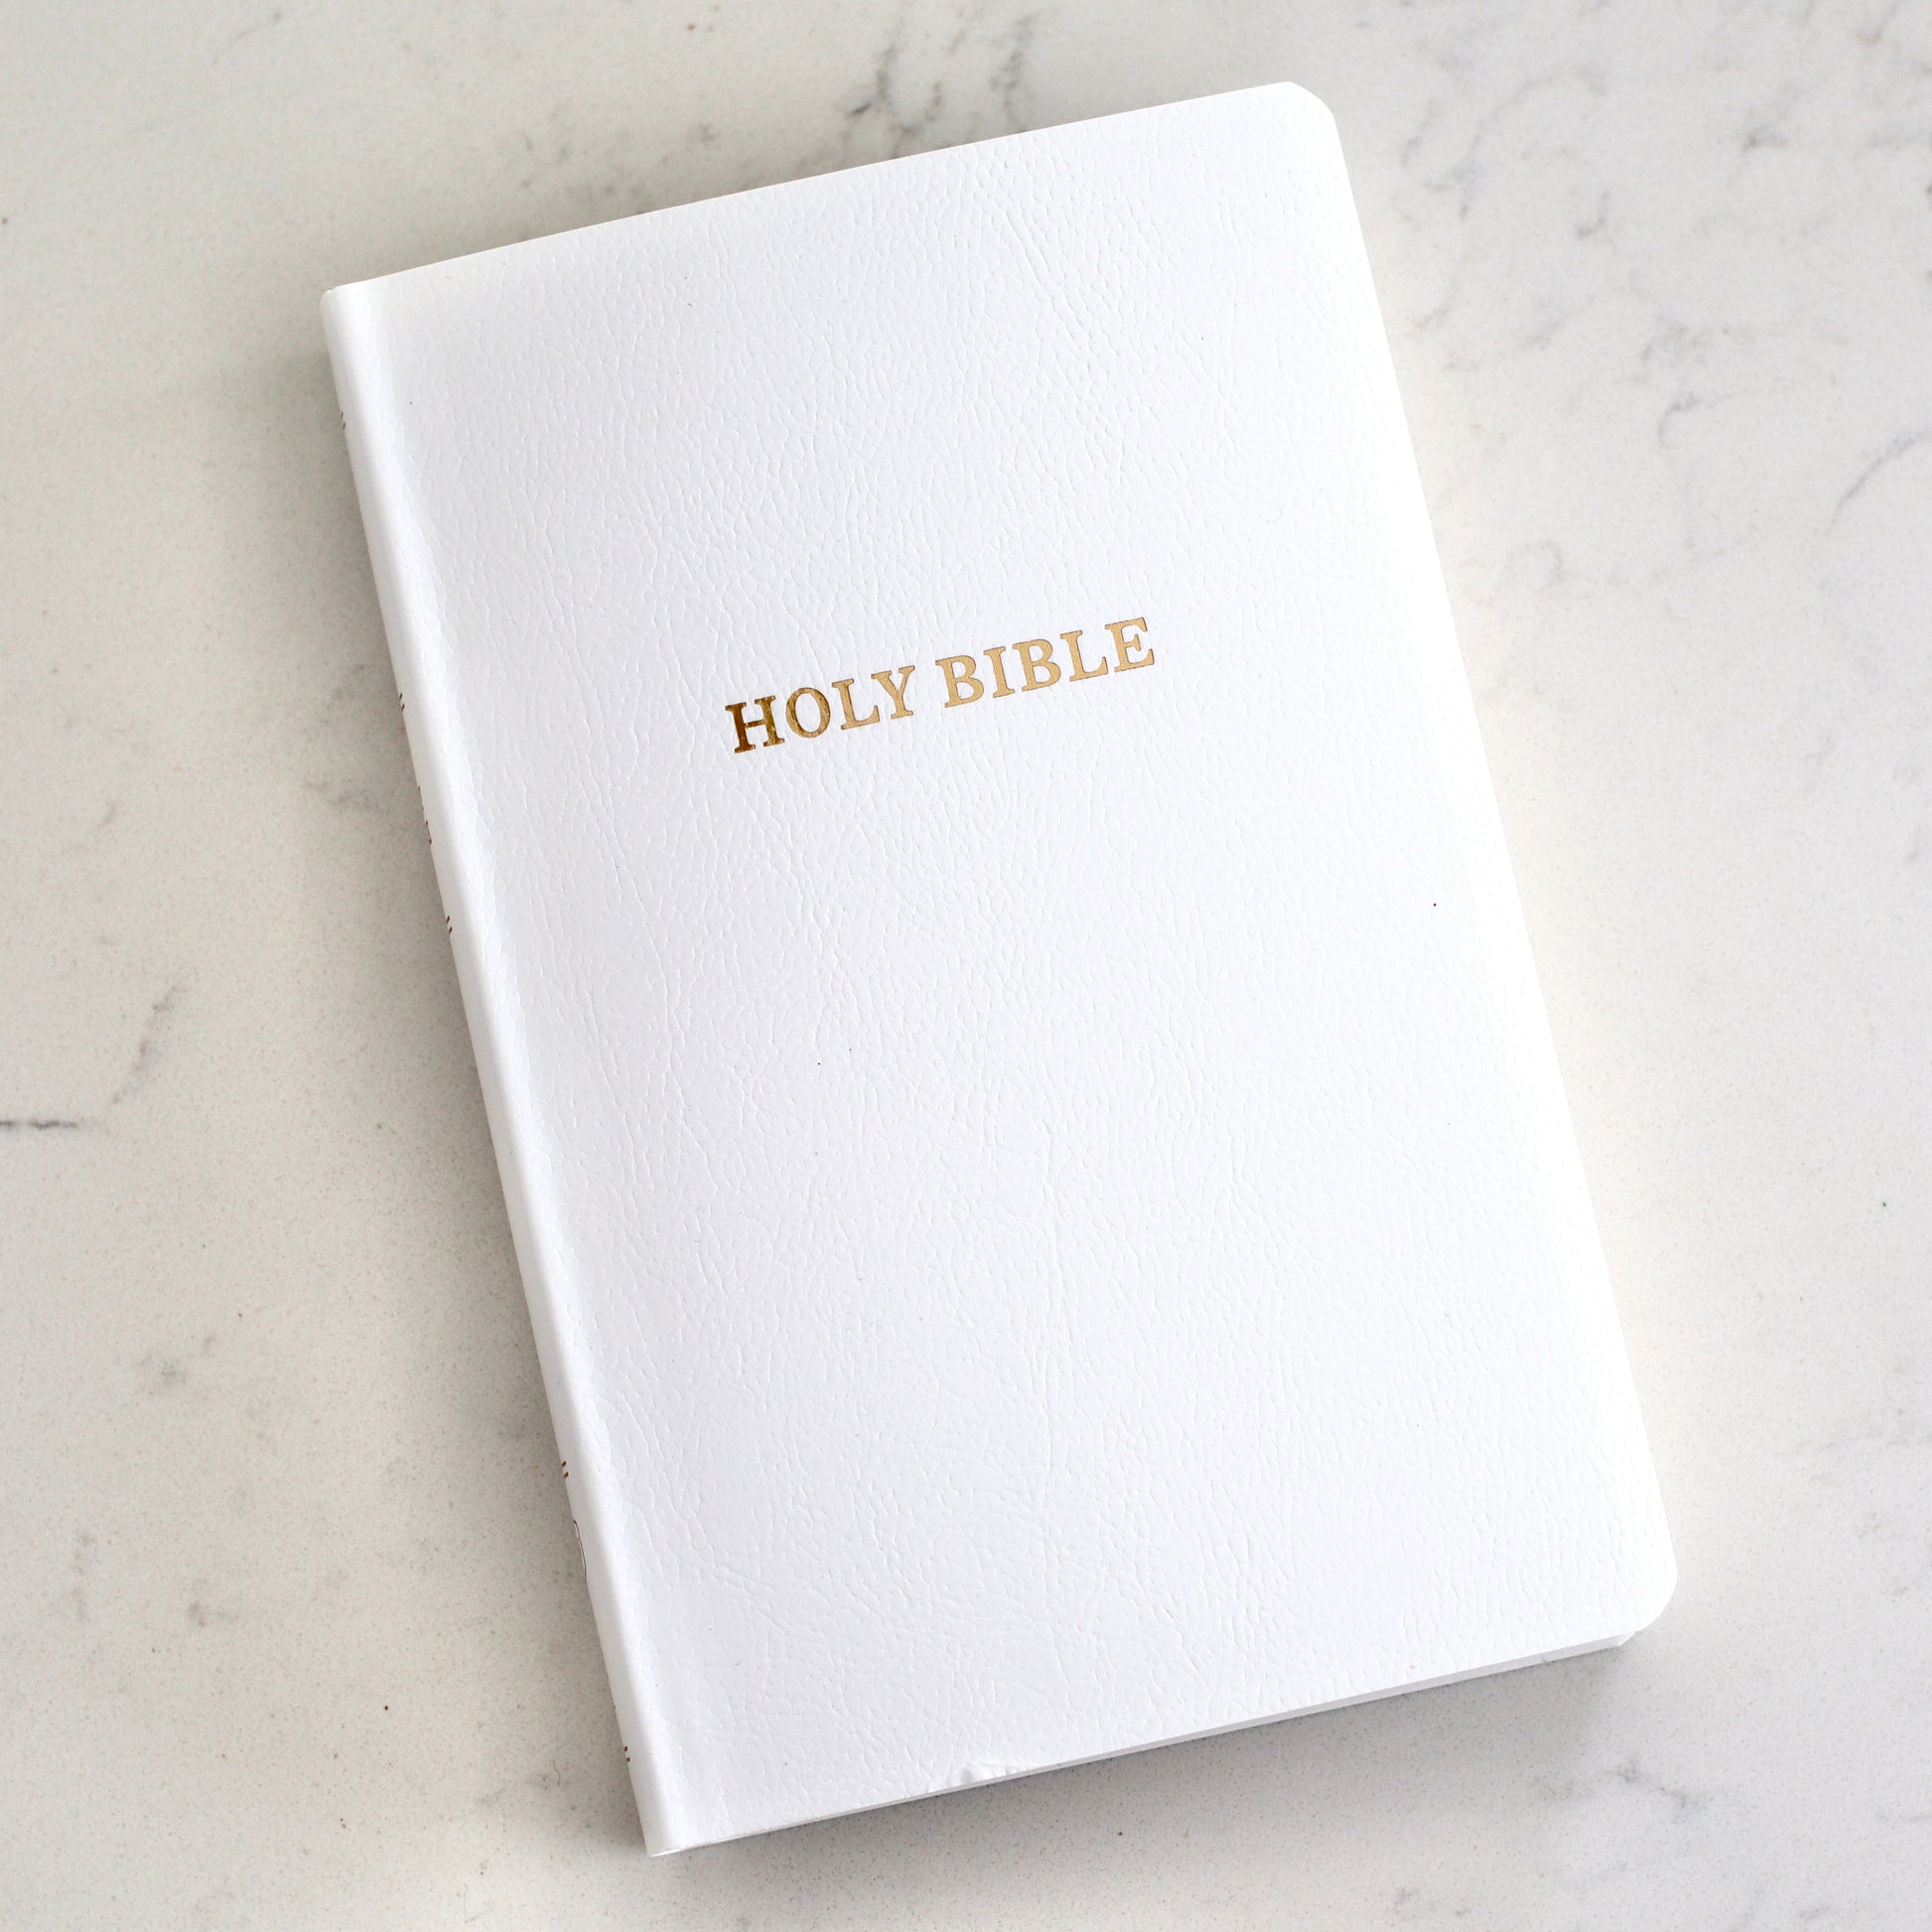 Orthodox Children's Bible (King James Version) with white cover - Personalise with your name